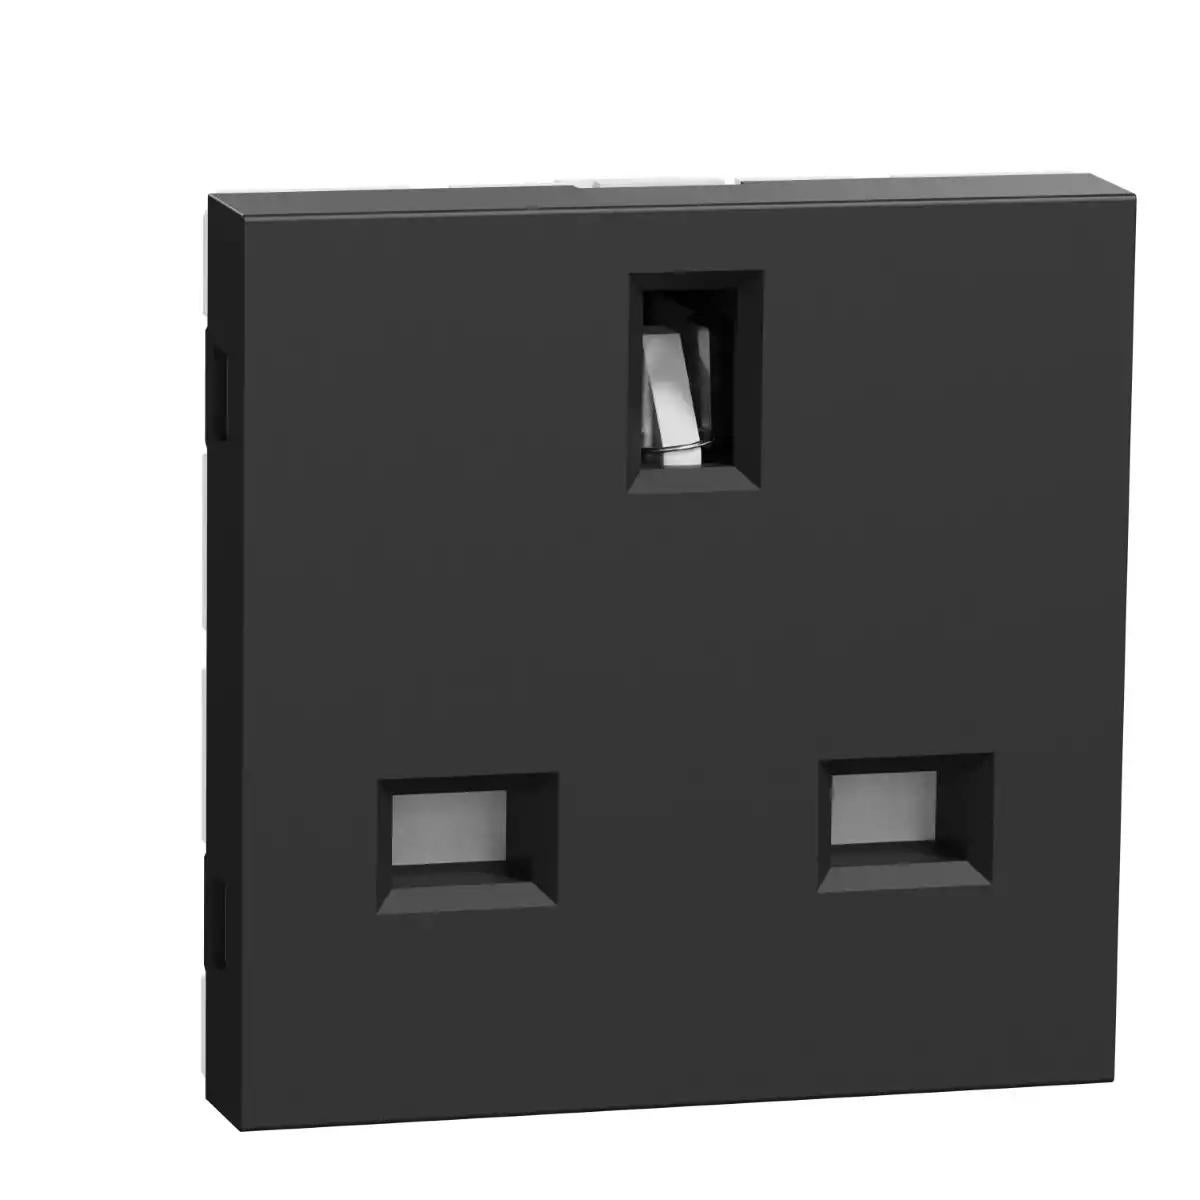 British socket outlet, New Unica, unswitched, 2P+E, 15 A, anthracite